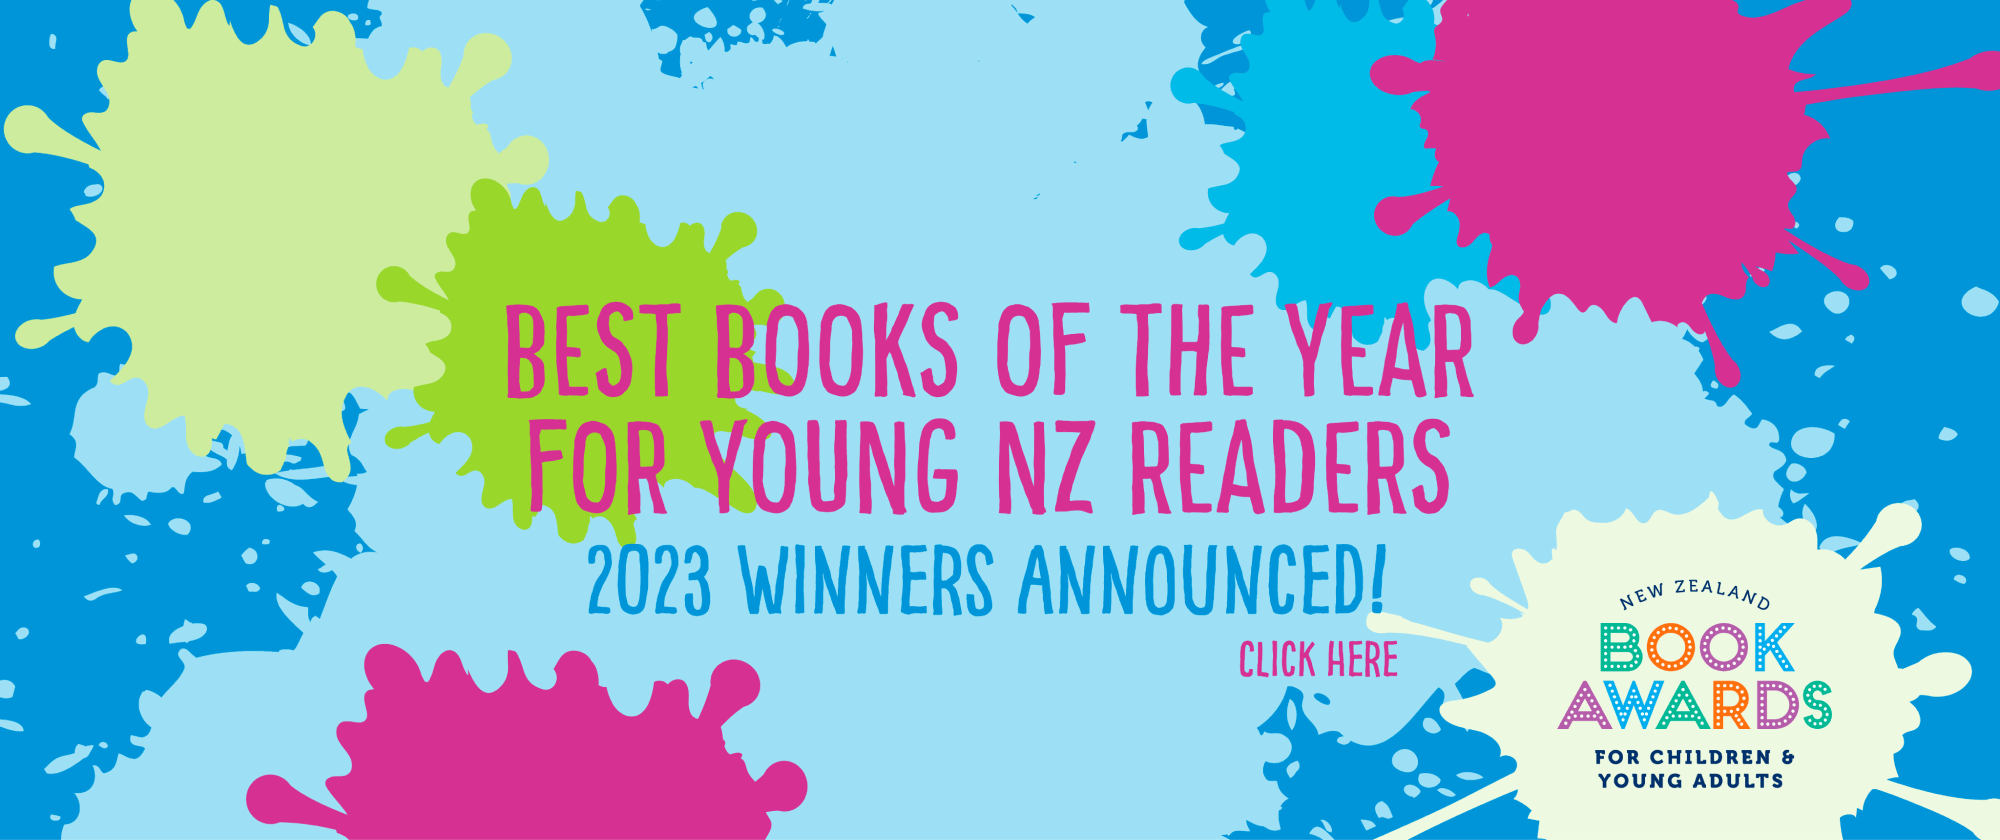 New Zealand Book Awards For Children And Young Adults - 2023 Winners announced